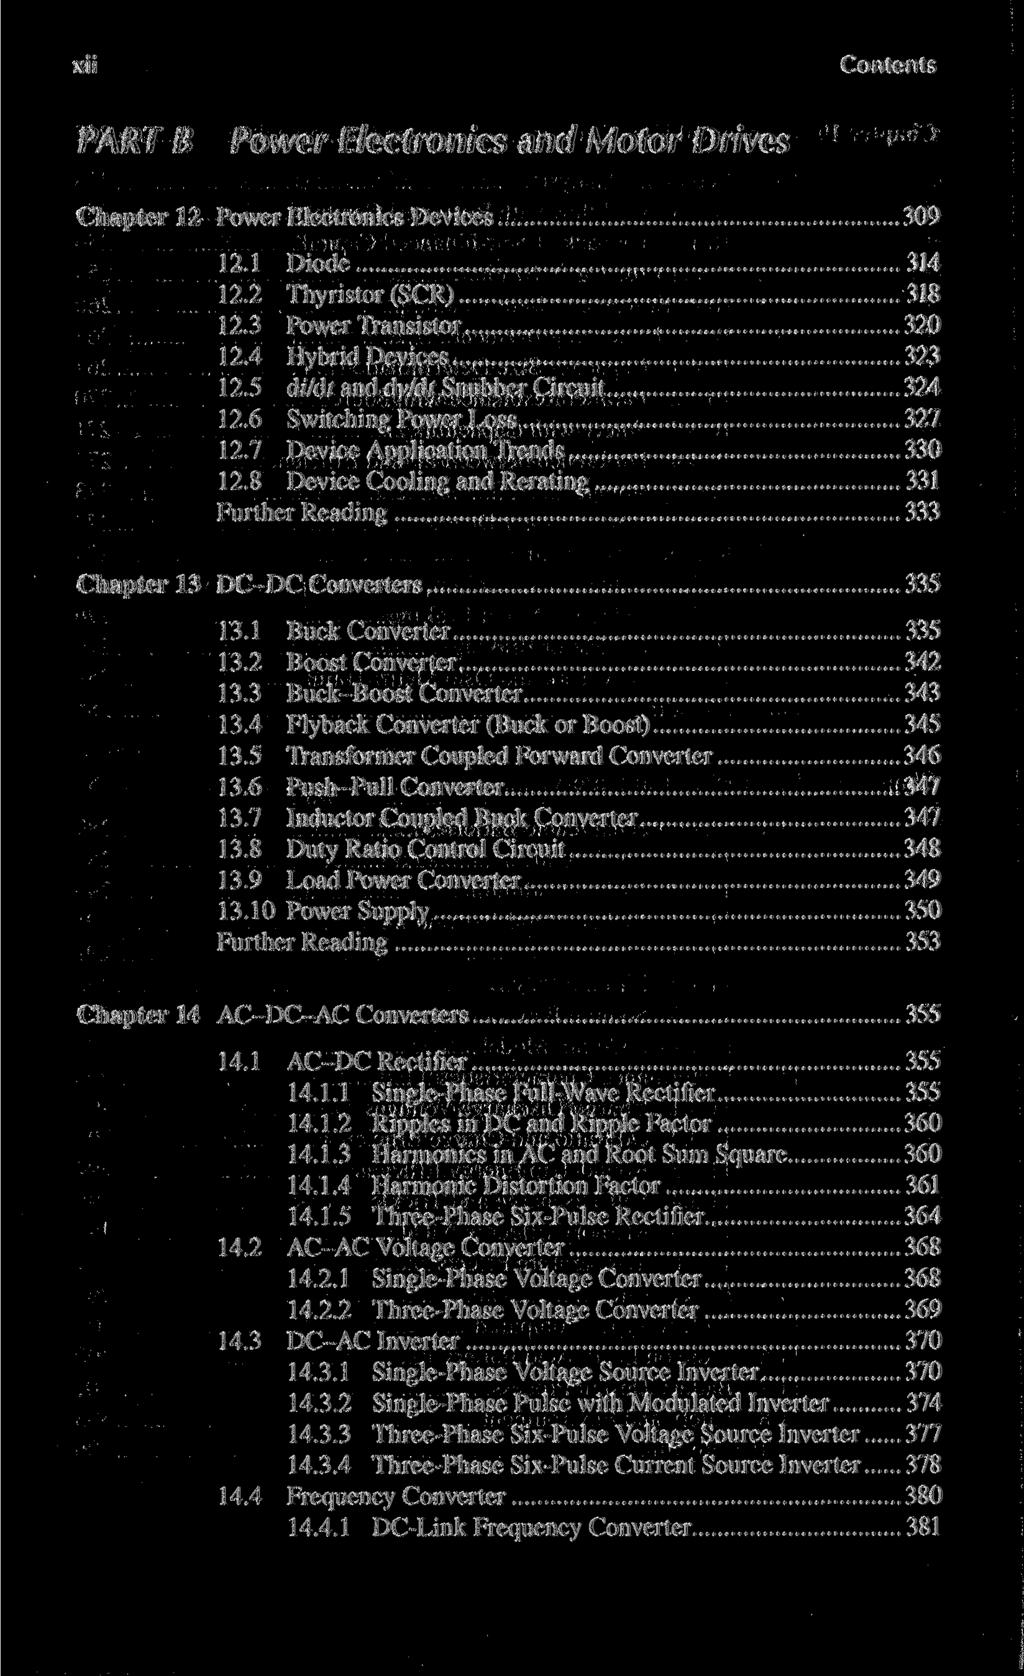 xii Contents PART B Power Electronics and Motor Drives Chapter 12 Power Electronics Devices 309 12.1 Diode 314 12.2 Thyristor (SCR) 318 12.3 Power Transistor 320 12.4 Hybrid Devices 323 12.